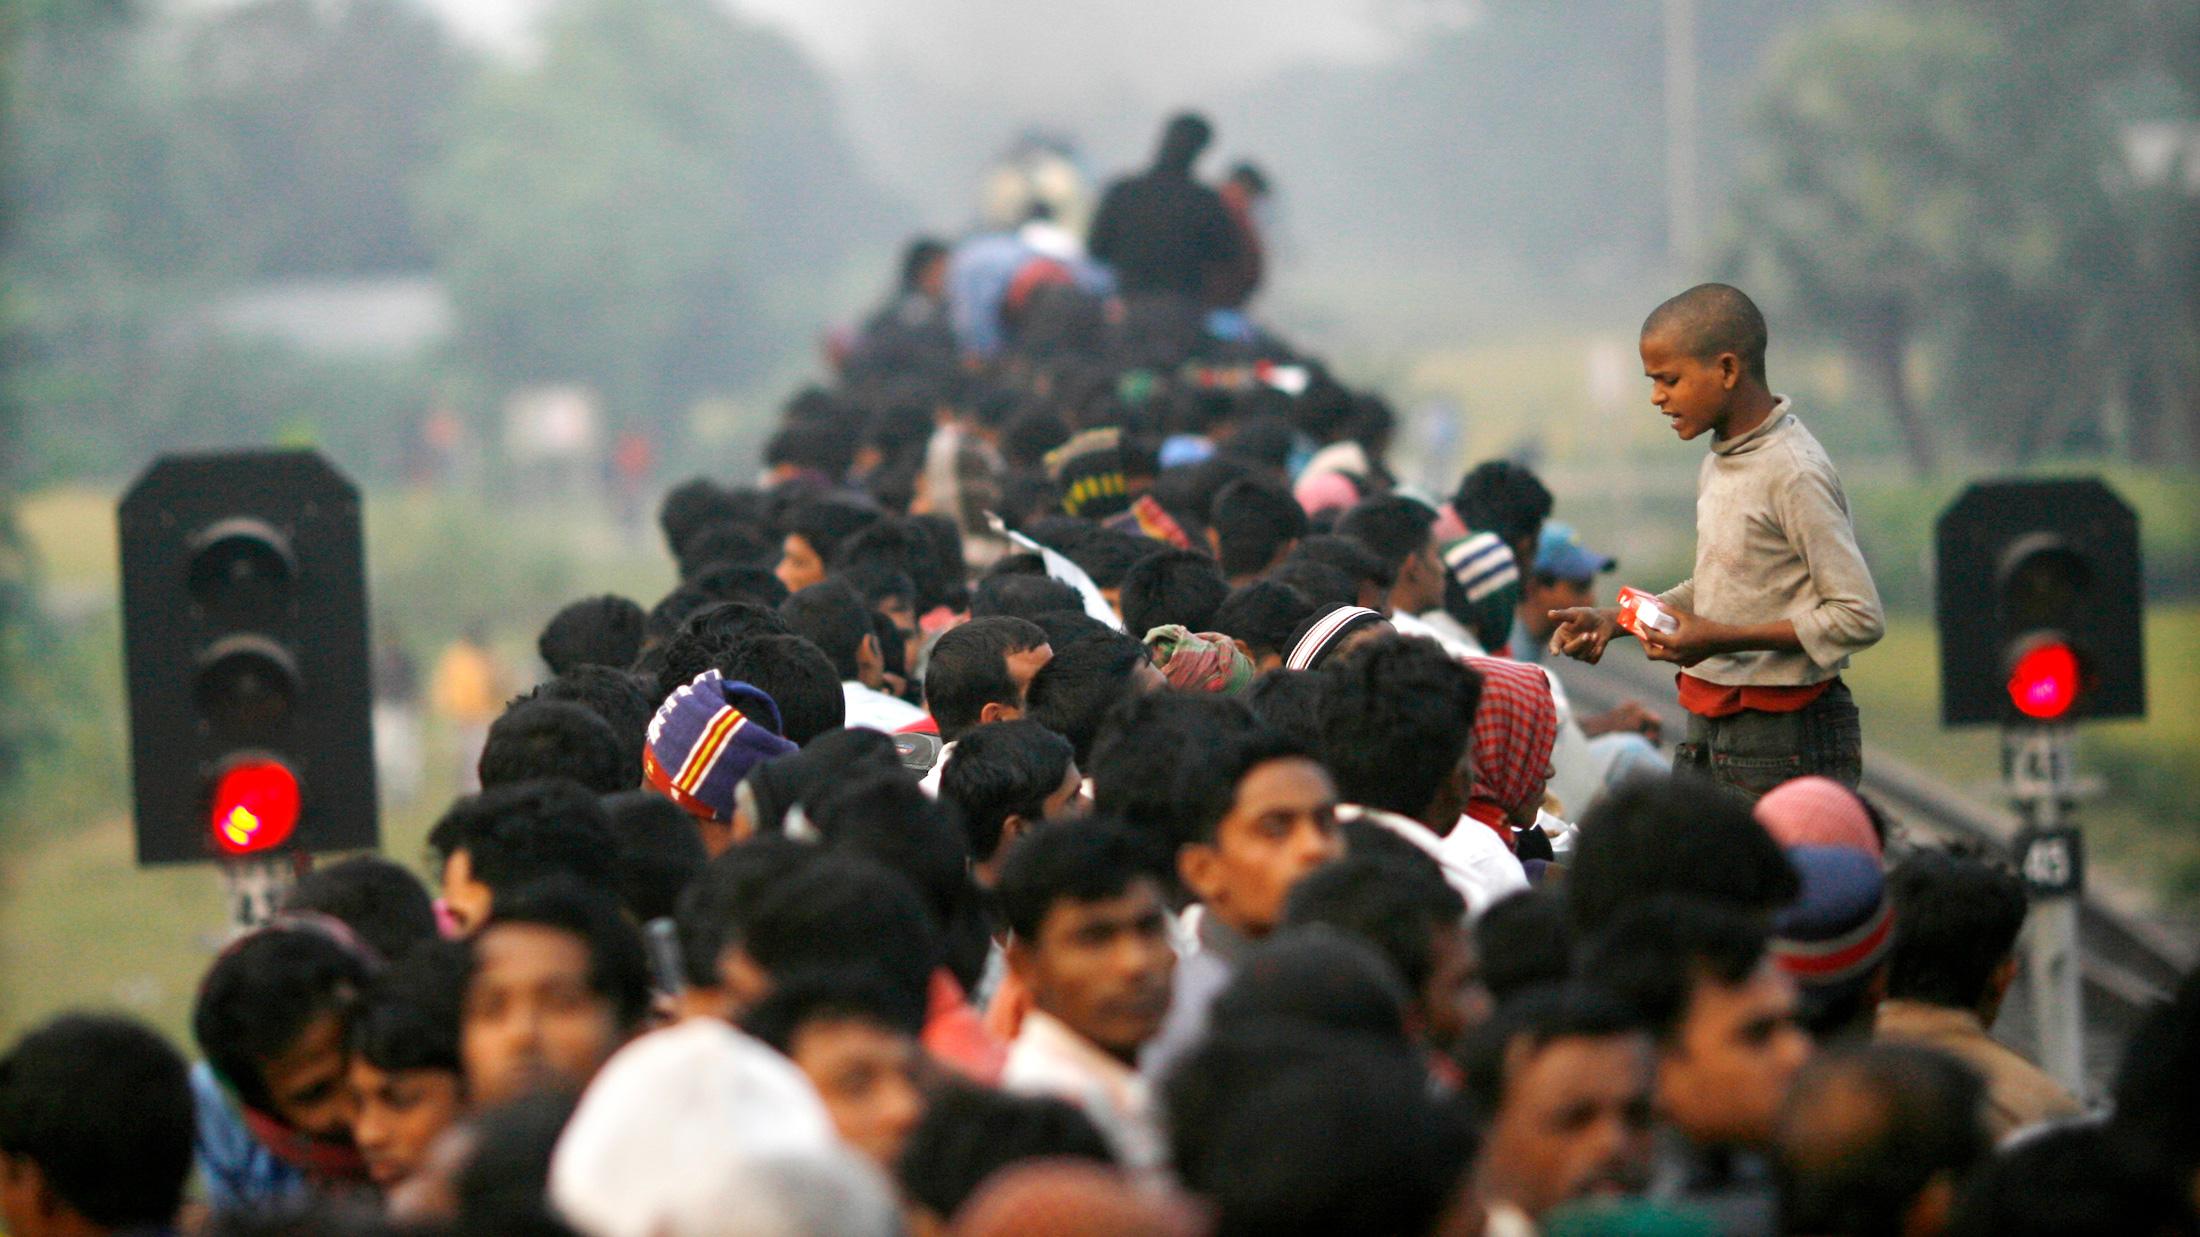 The photo shows a boy standing above a crowd of seated adults hawking smokes. 